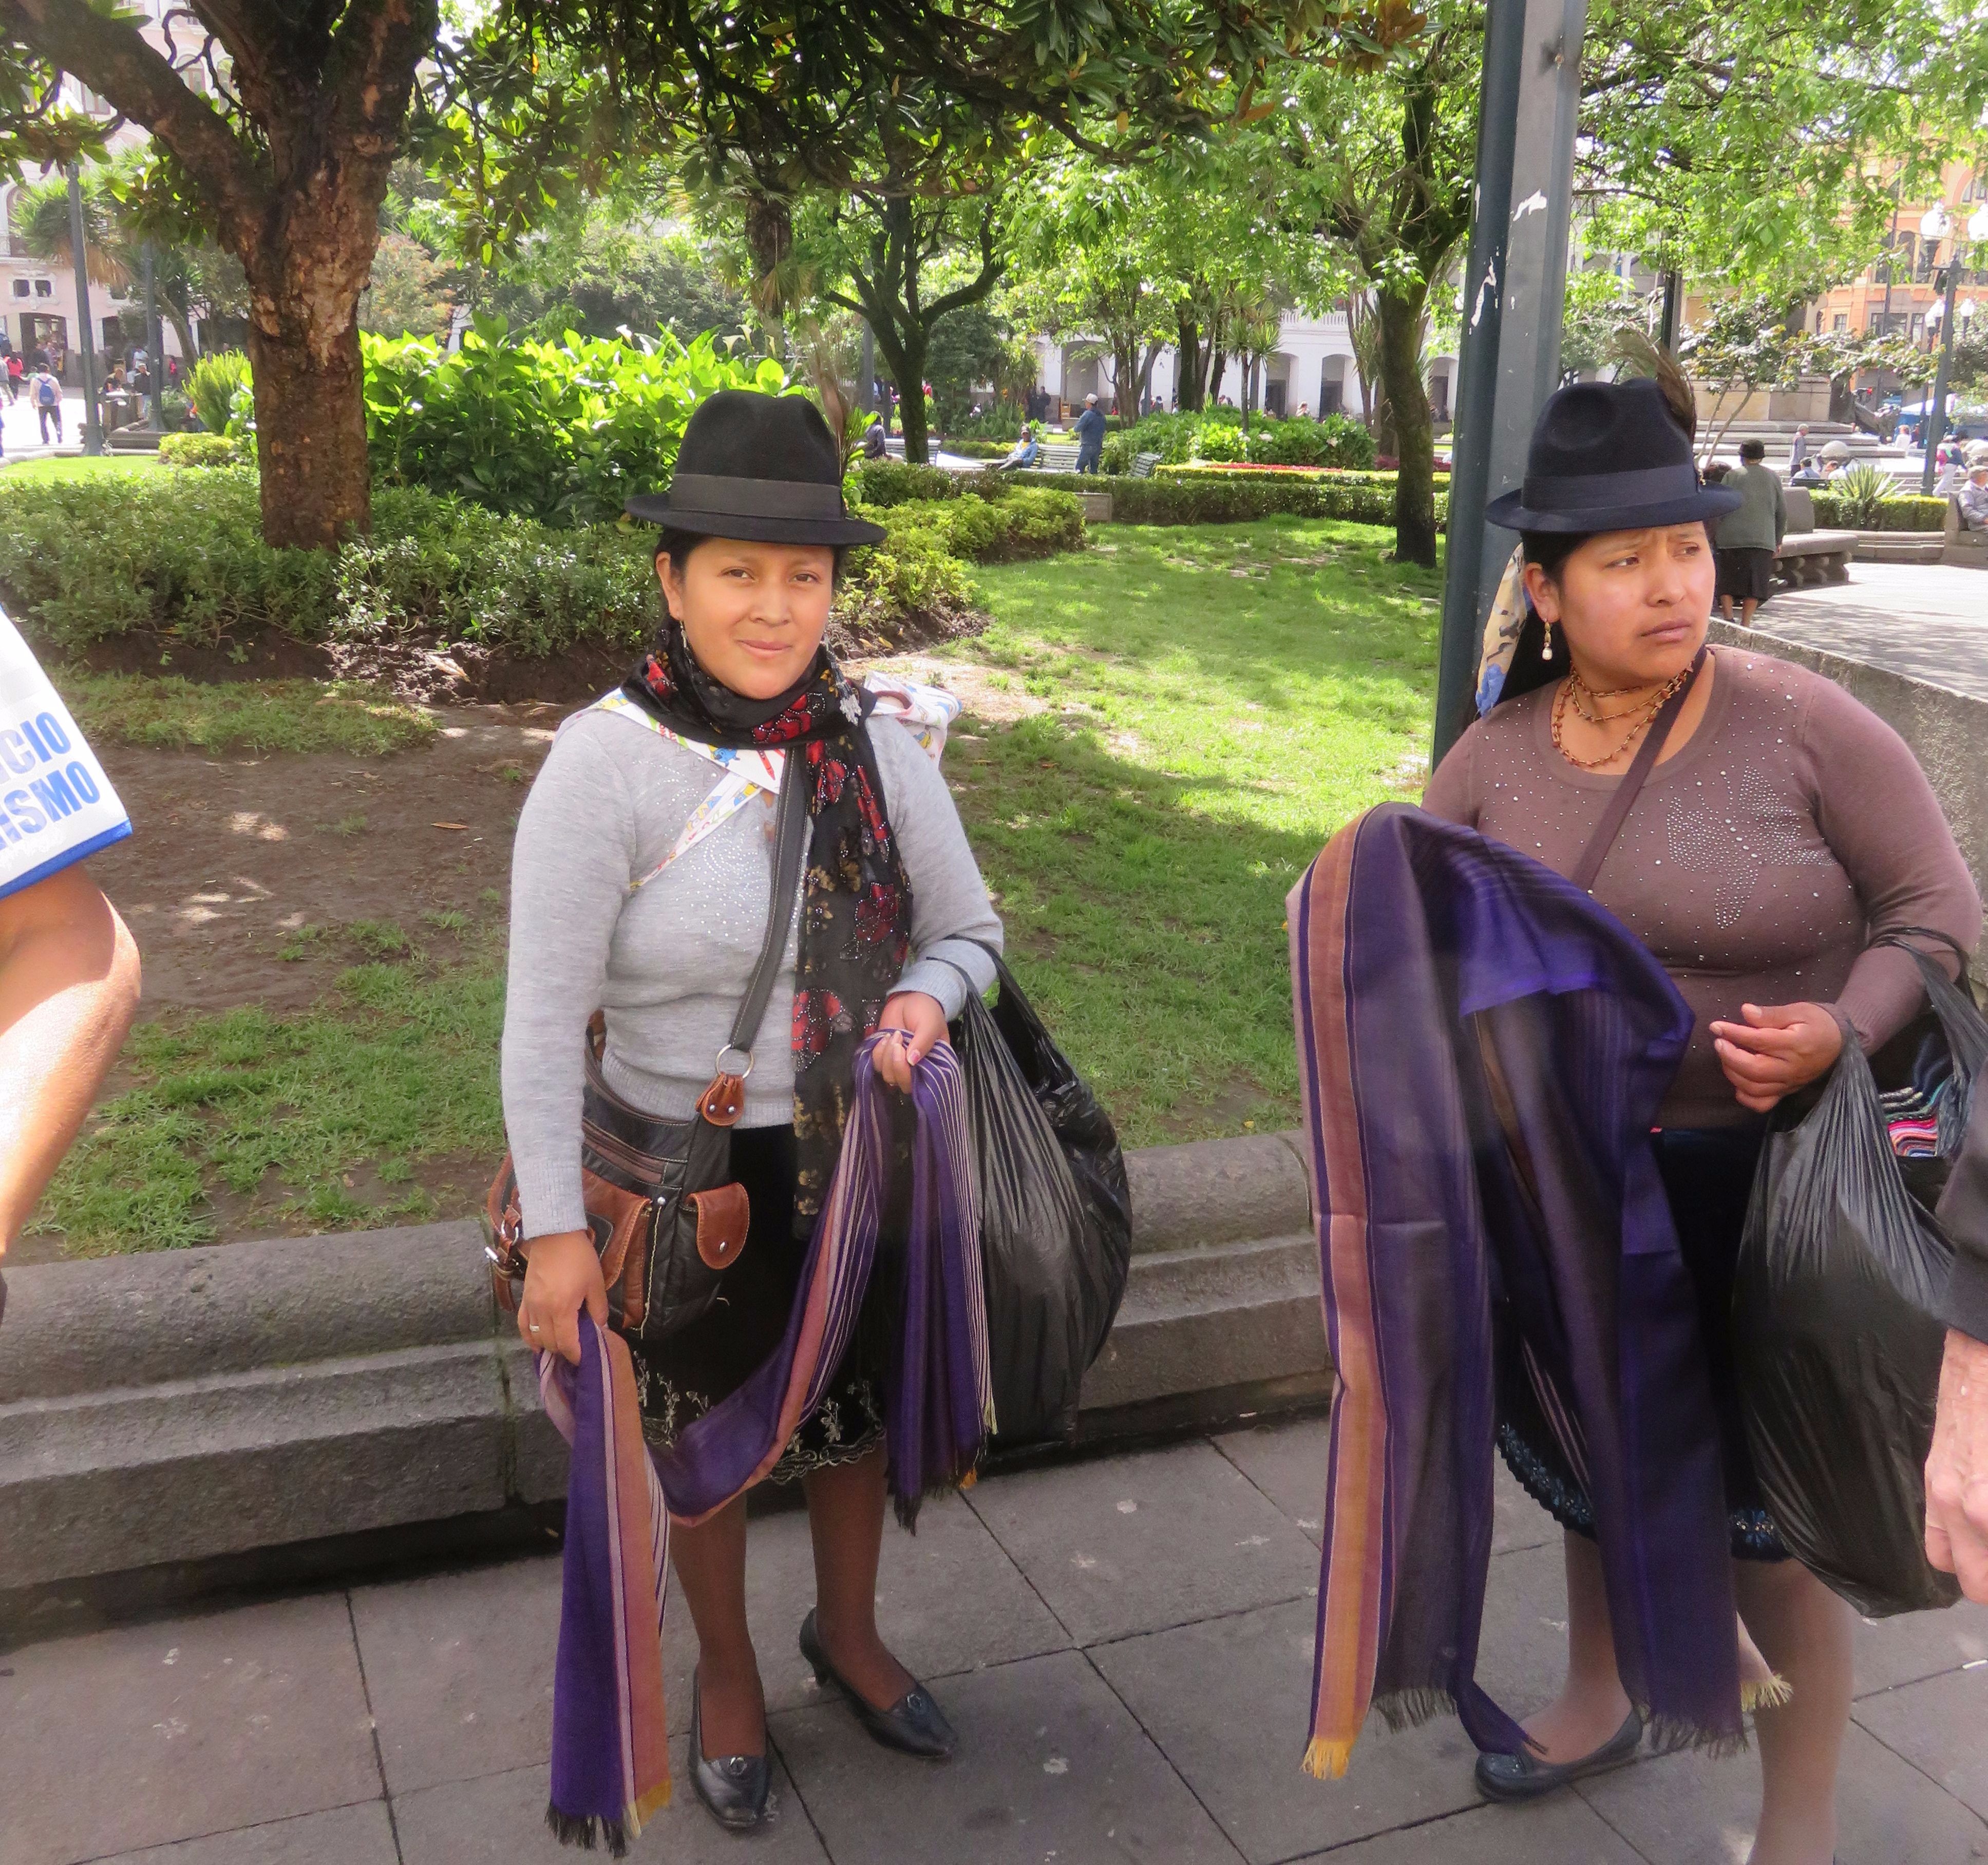 Local residents of Quito in traditional hats. enBays